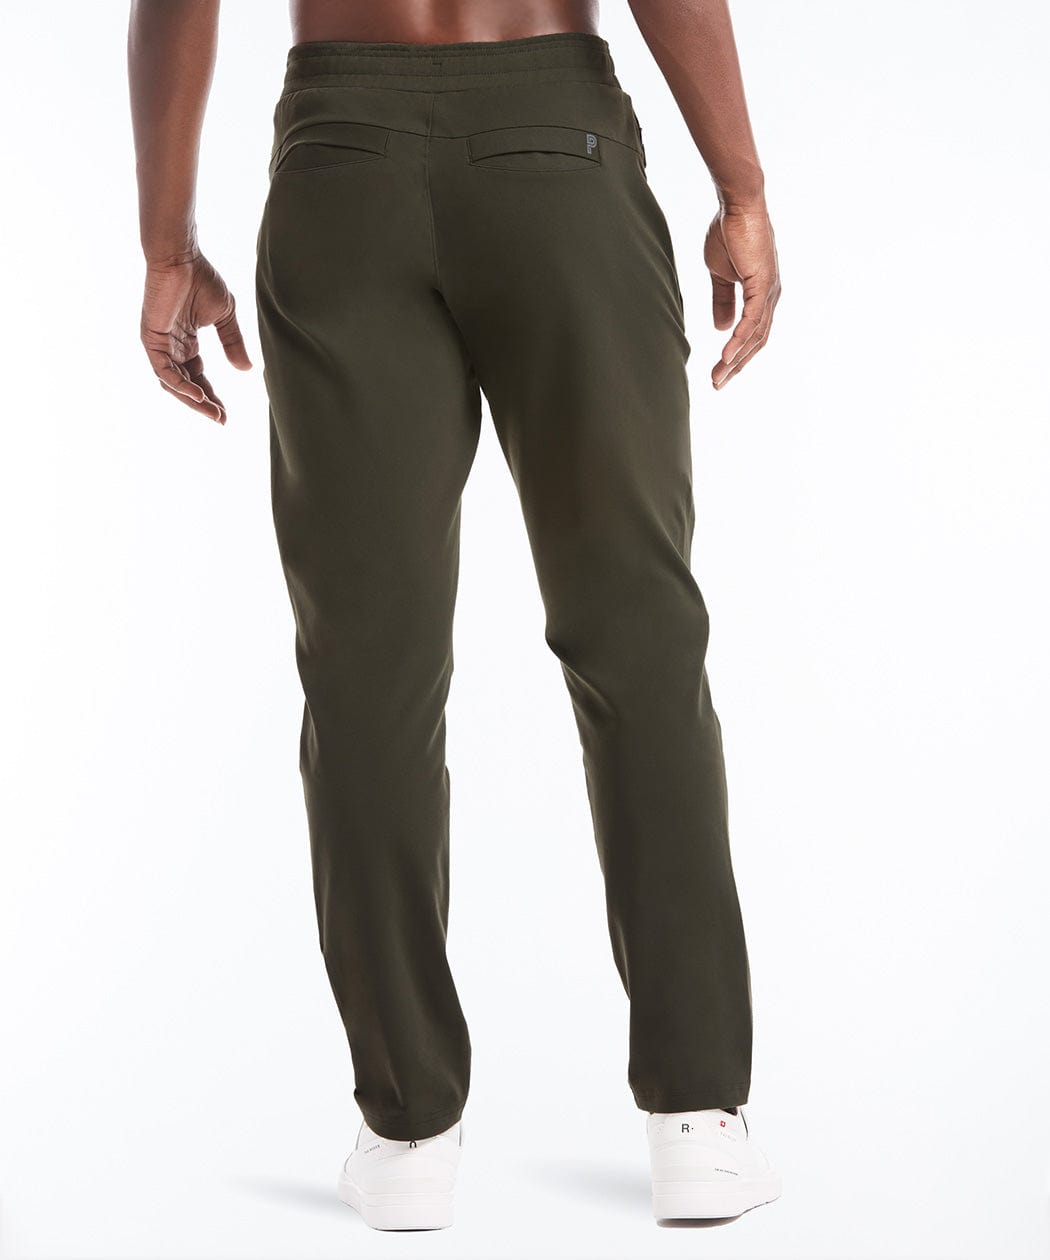 Men's Travel Pants With Adjustable Length / DRiiBE